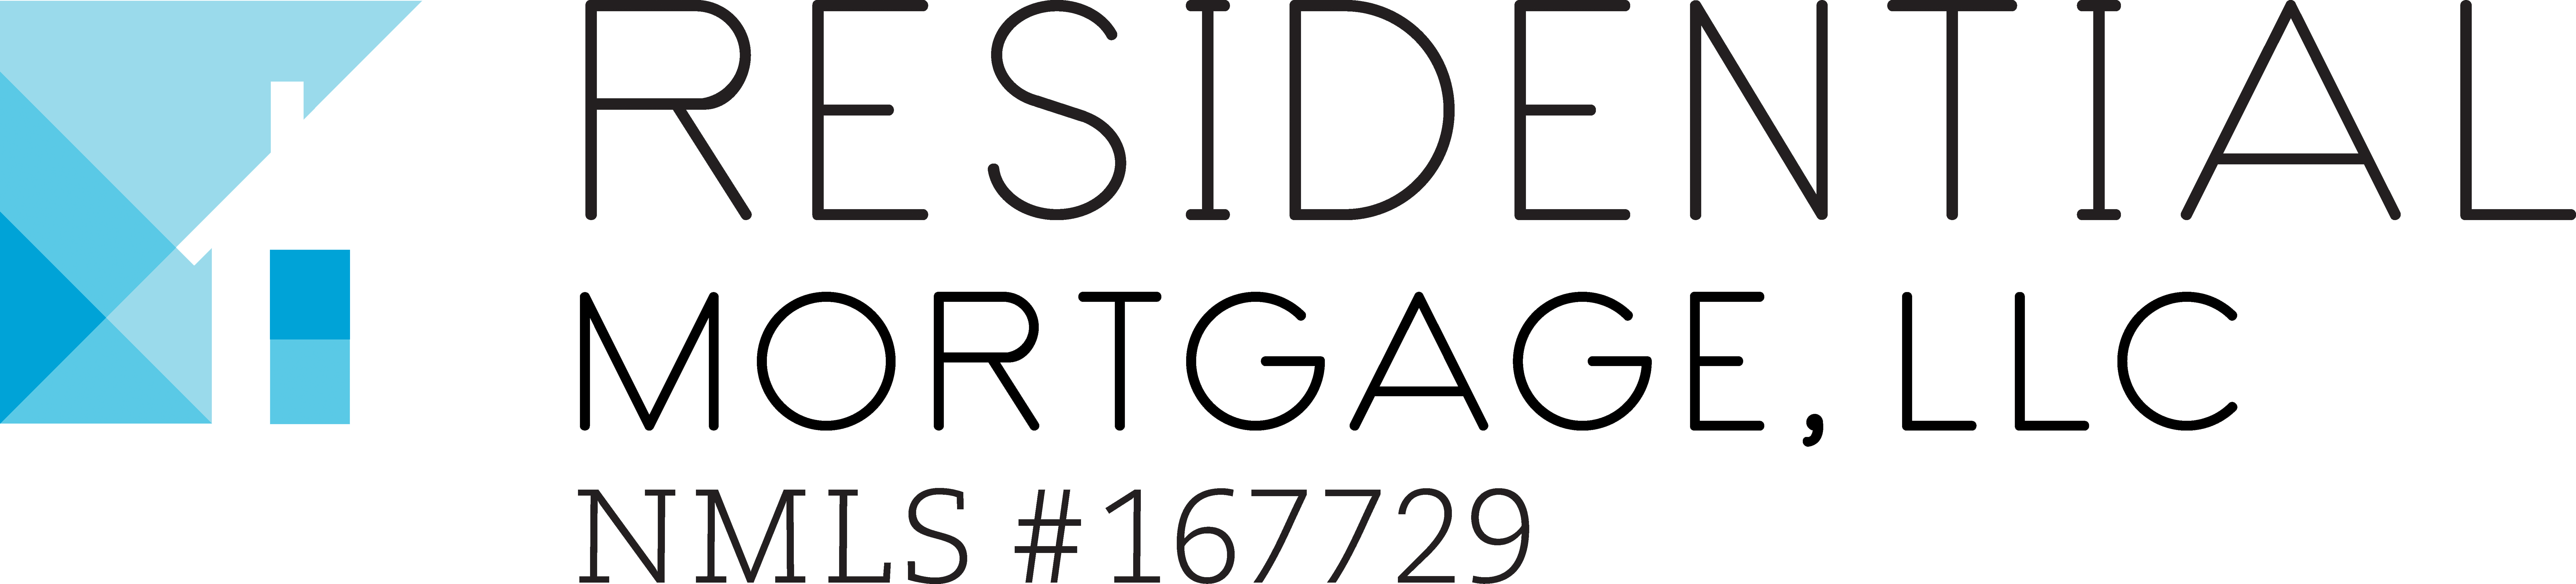 Residential Mortgage